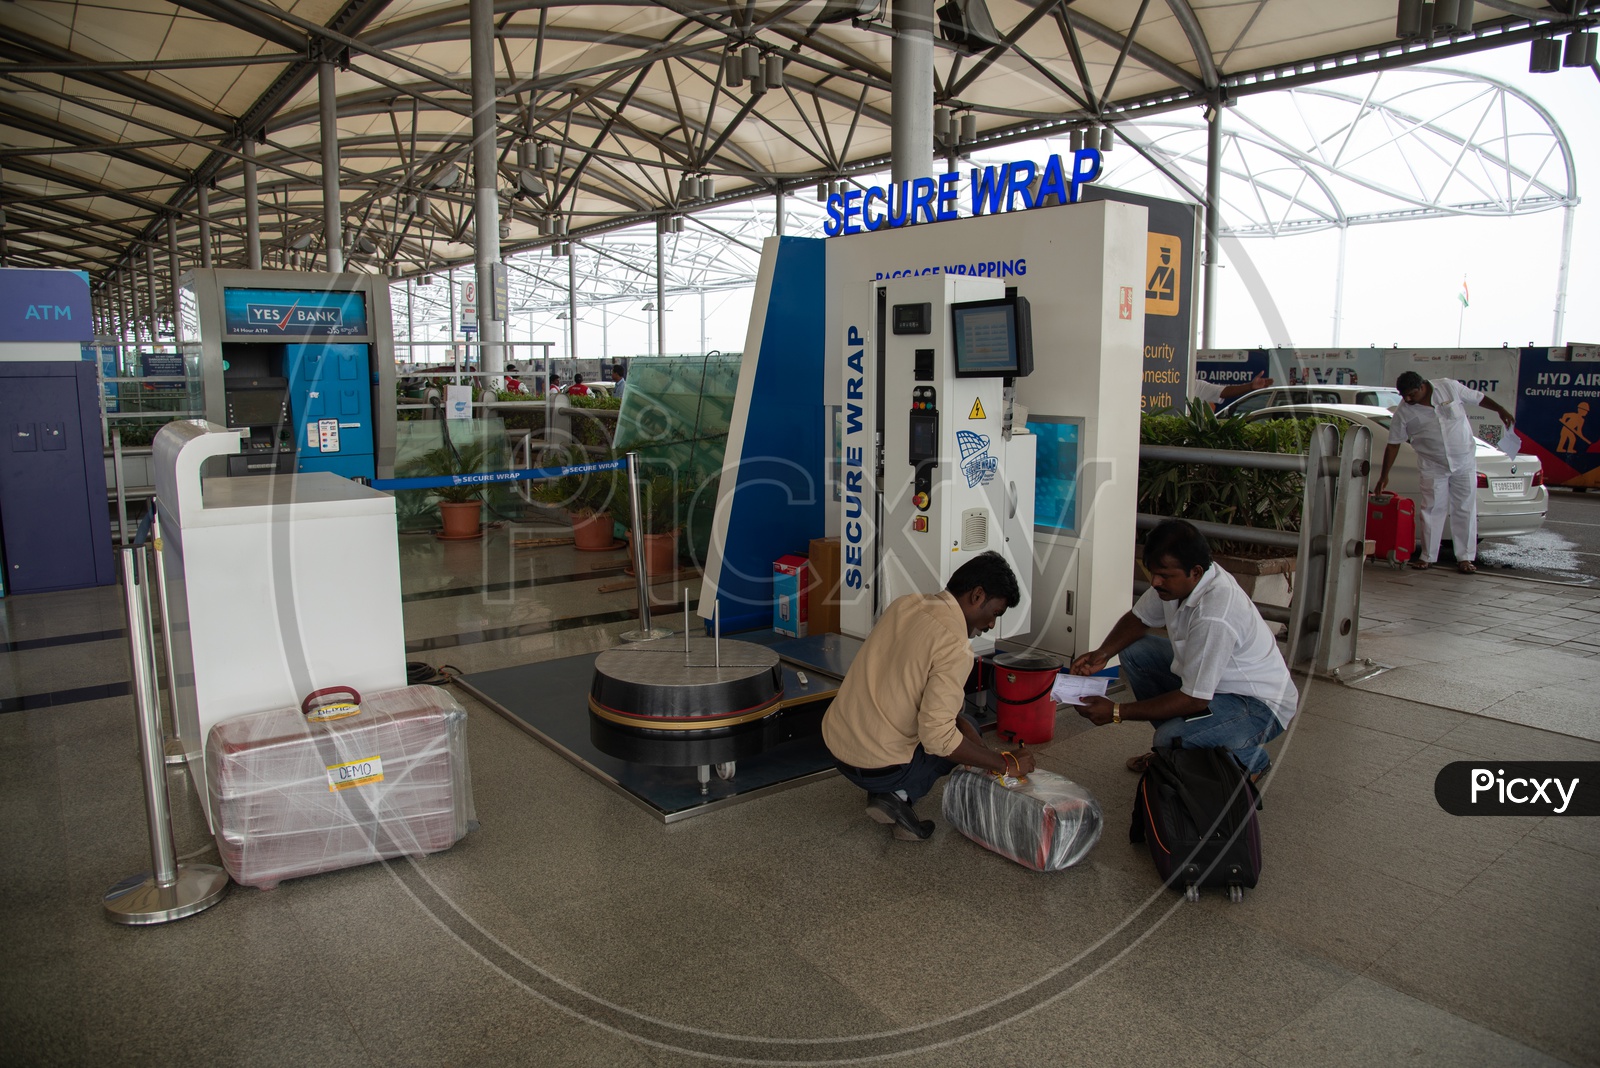 Secure Wrap, a baggage wrapping outlet,Rajiv Gandhi International Airport (HYD), Hyderabad